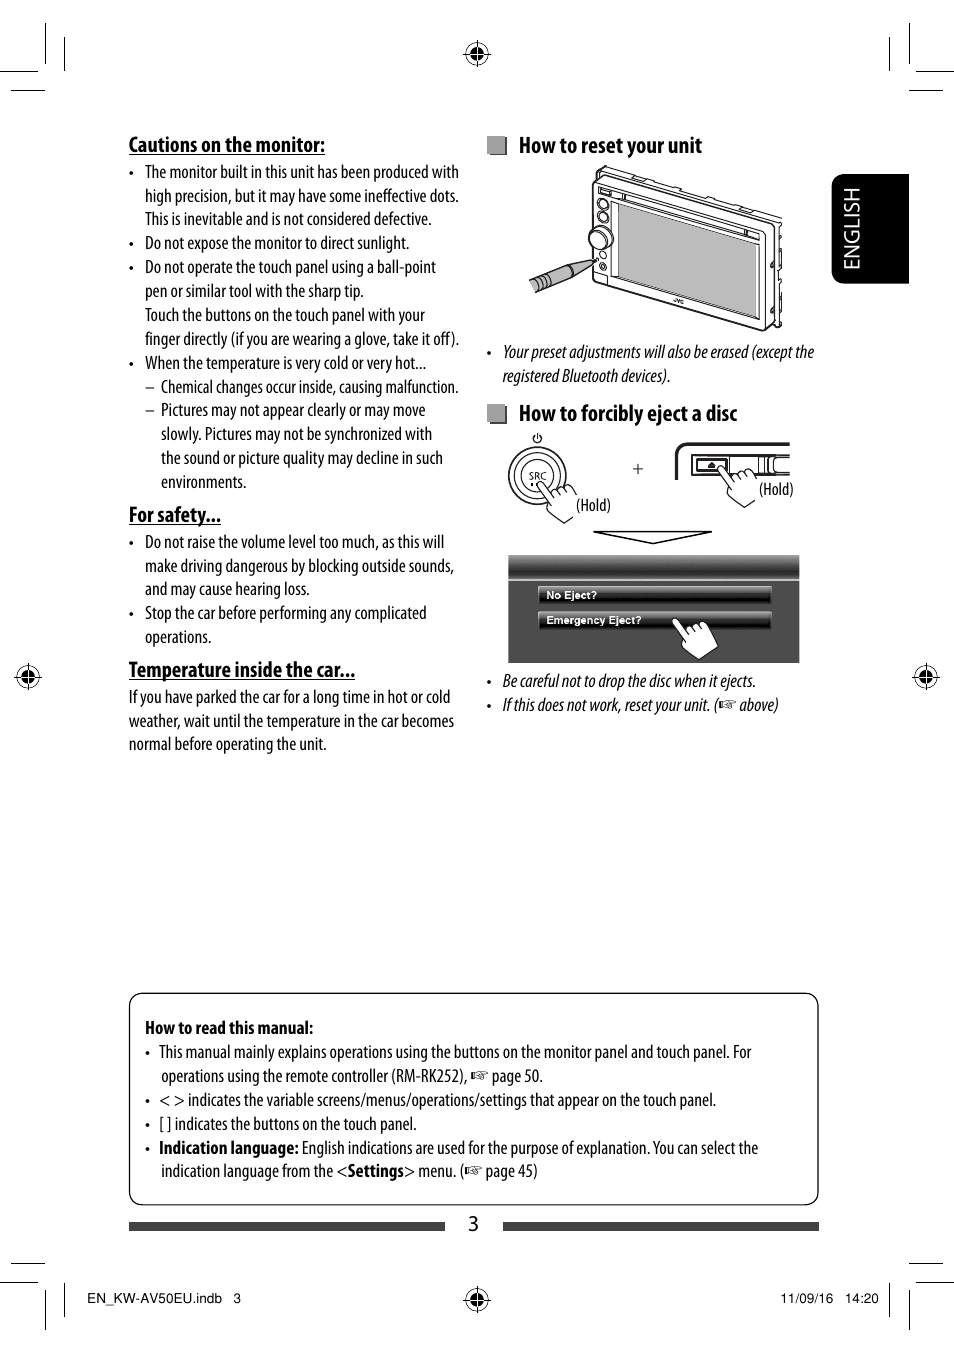 How to reset your unit, How to forcibly eject a disc | JVC KW-AV50 User  Manual | Page 3 / 183 | Original mode